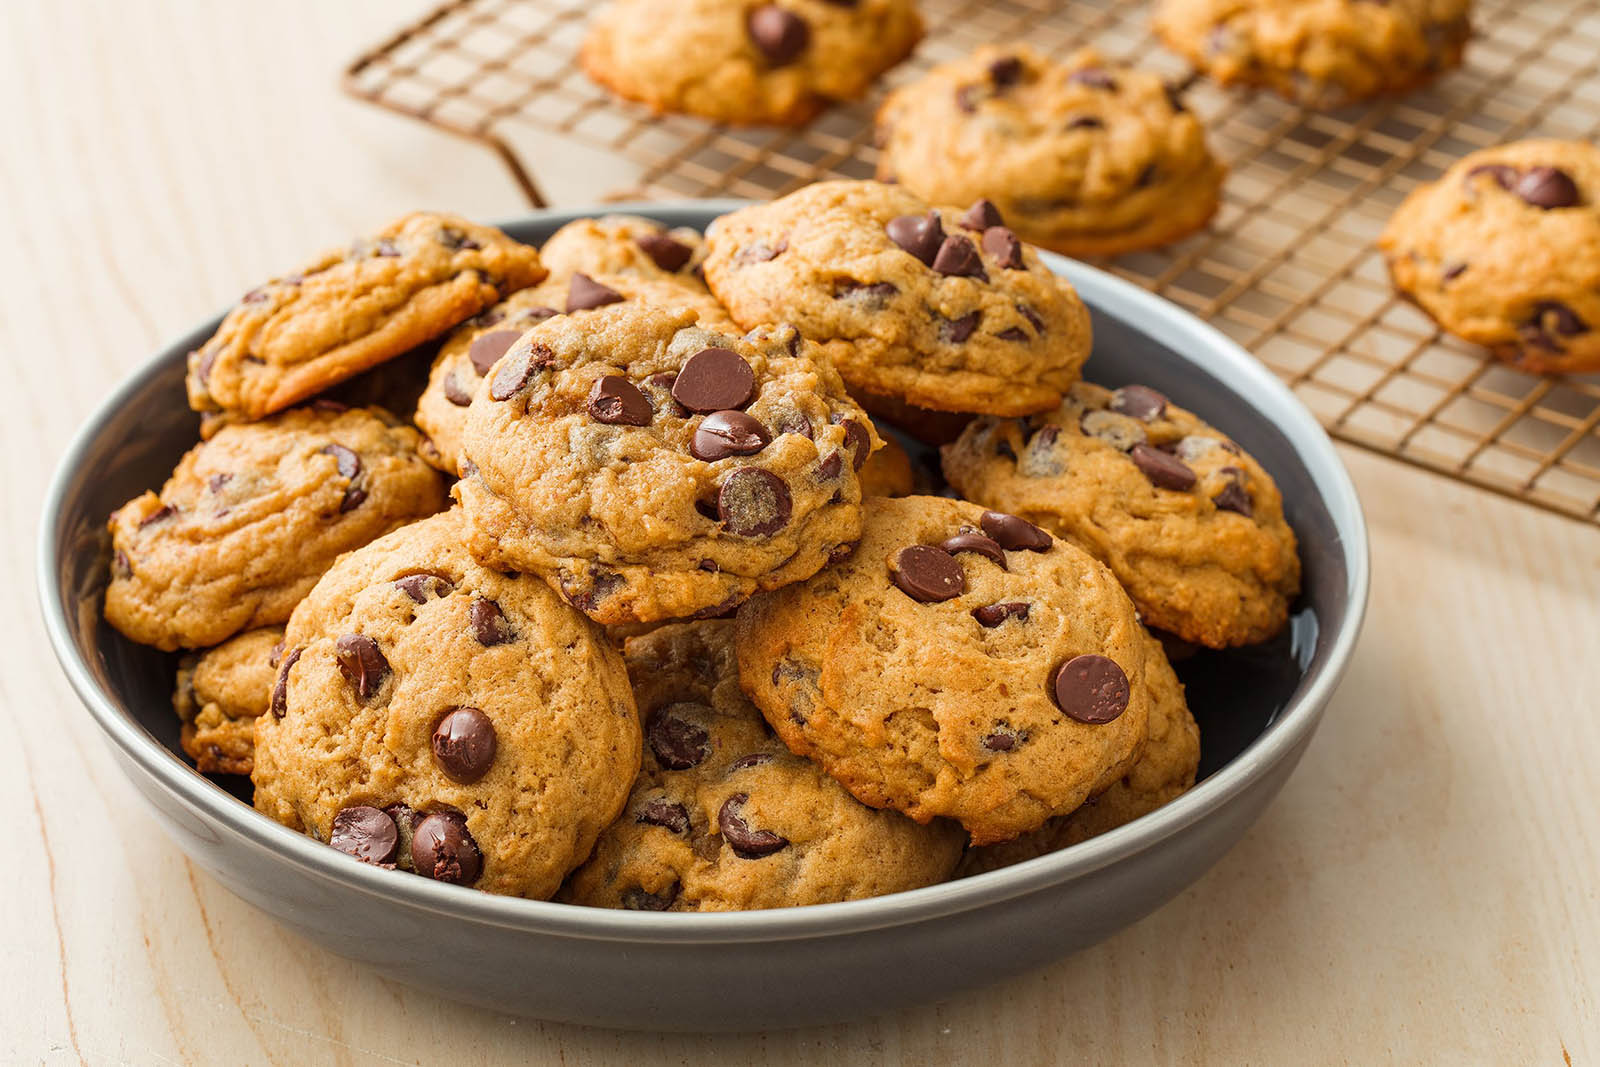 🍫 We Know Whether You’re an Introvert, Extrovert, Or Ambivert Based on How You Rate These Chocolate Desserts Chocolate Chip Cookies